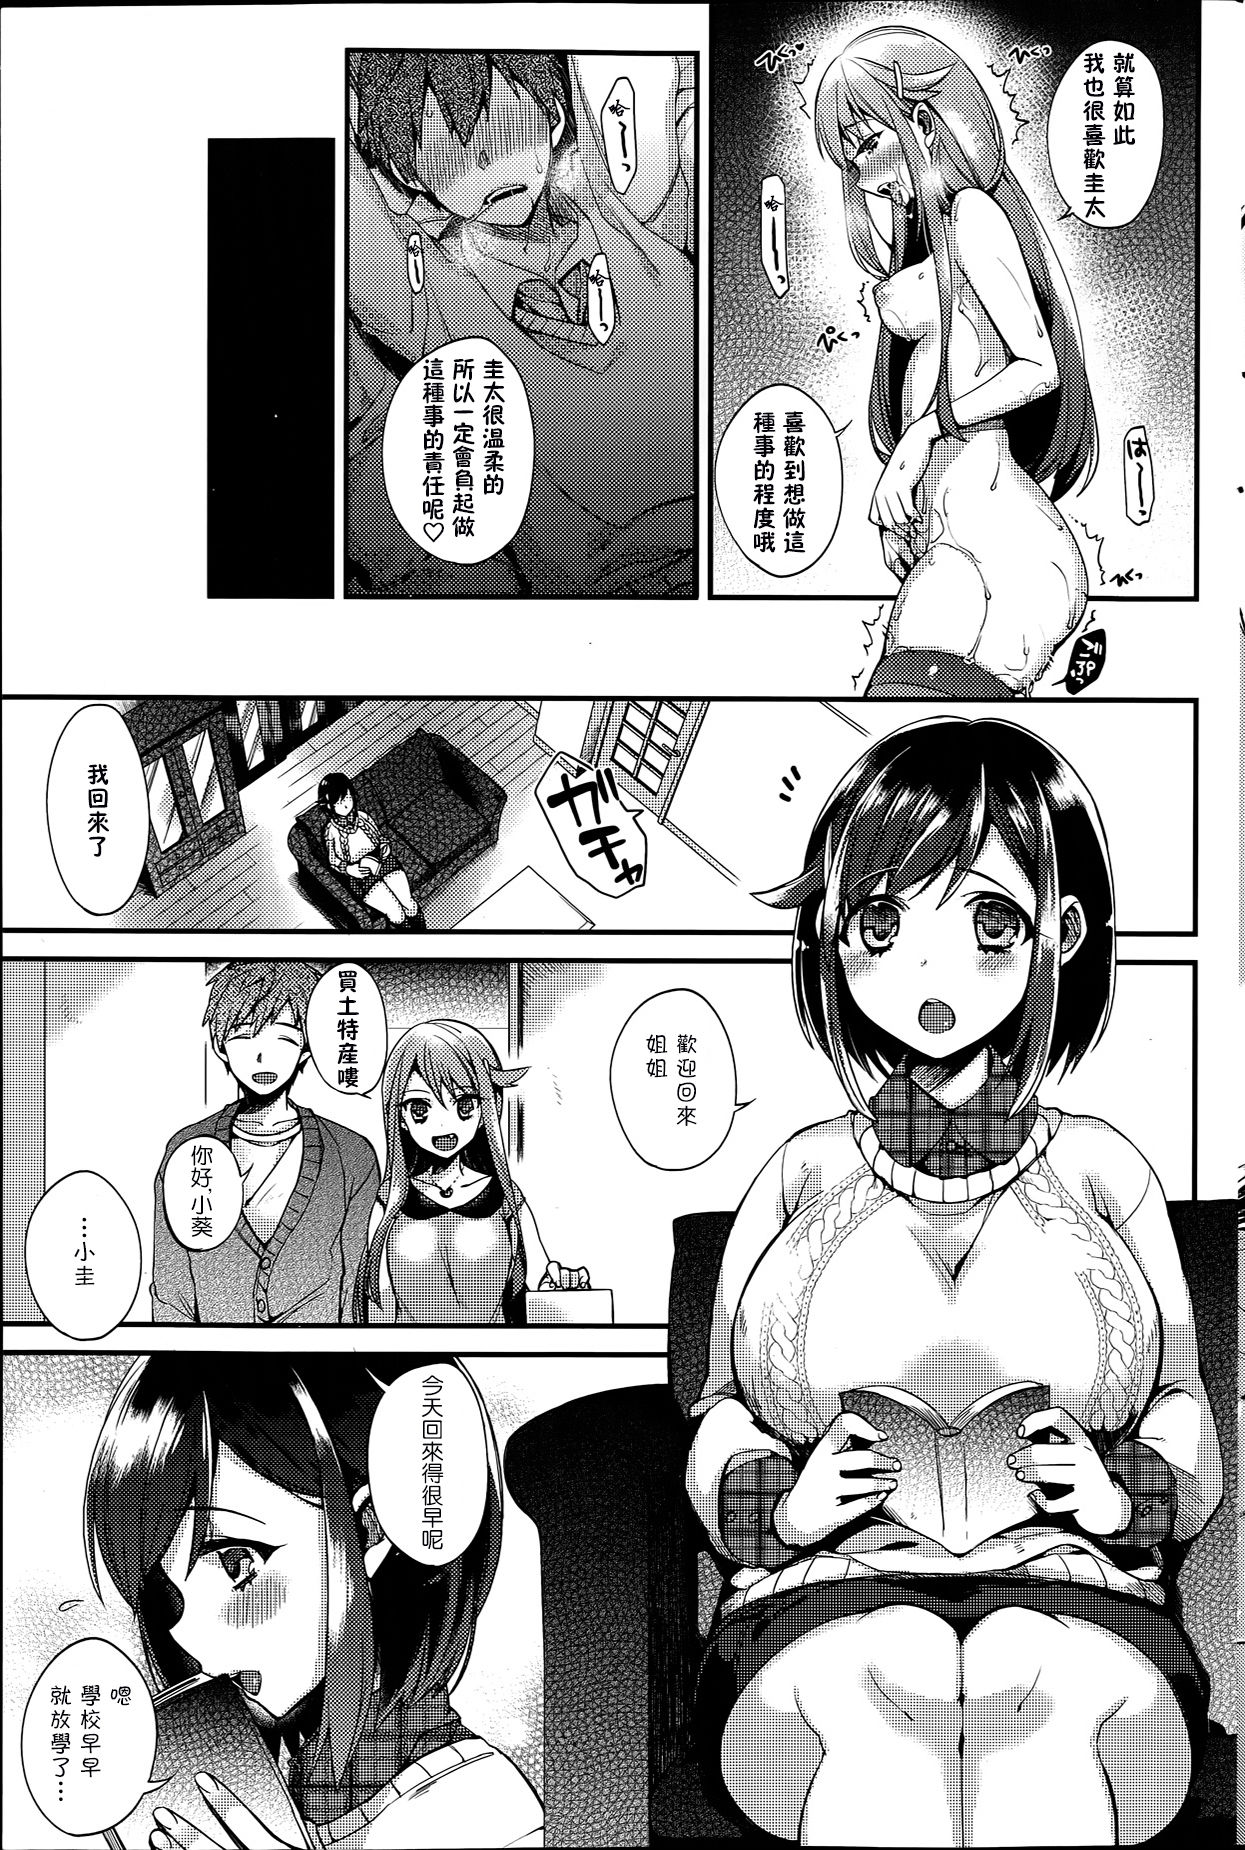 [Shindou] Sisters Conflict (Comic Hotmilk 2014-06) [Chinese] [无毒汉化组] [しんどう] Sisters Conflict (コミックホットミルク 2014年6月号) [中文翻譯]